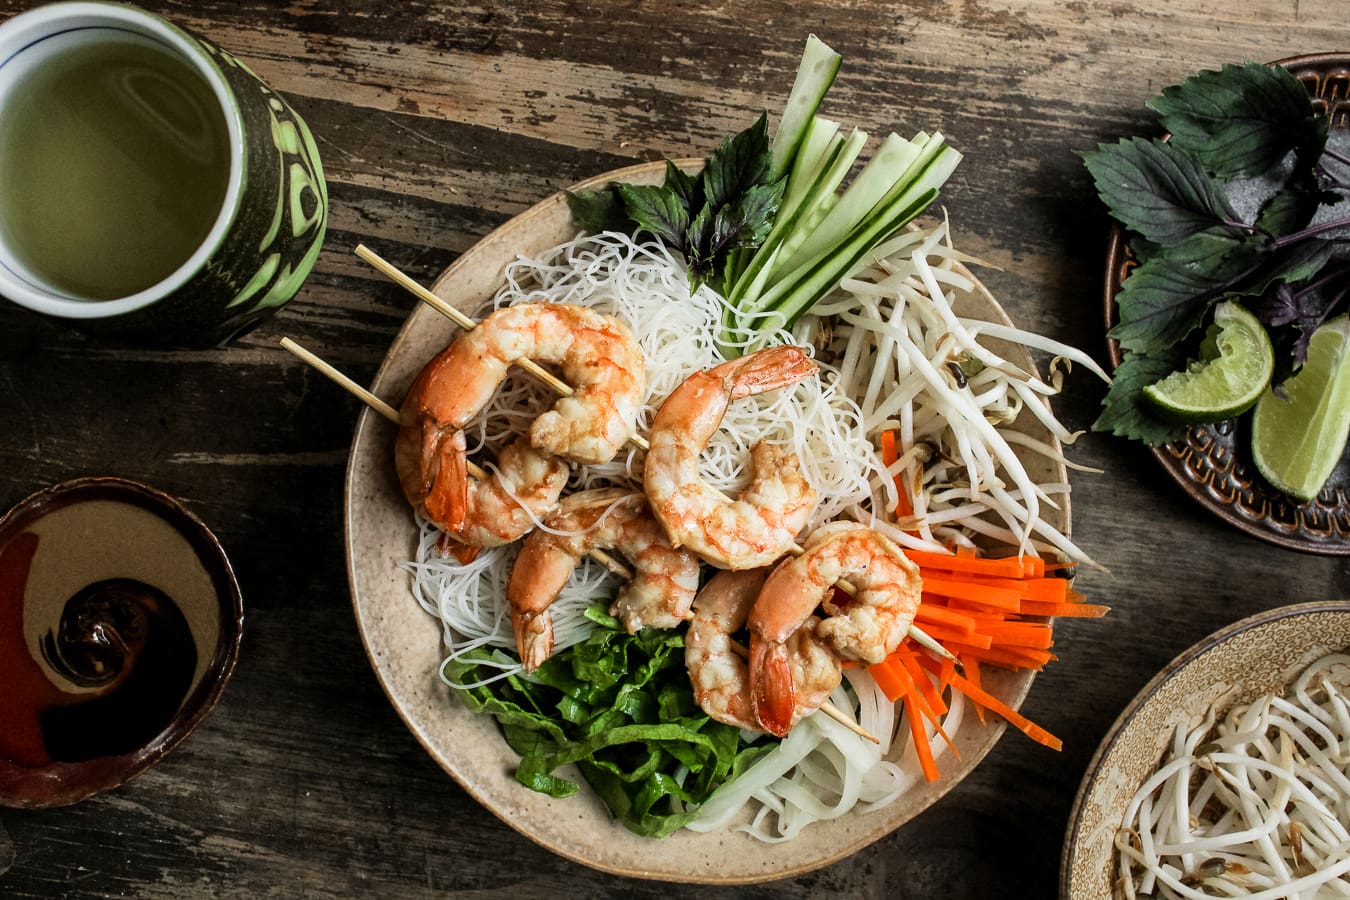 A bowl of vermicelli with Vietnamese grilled shrimp on top served with a side of tea